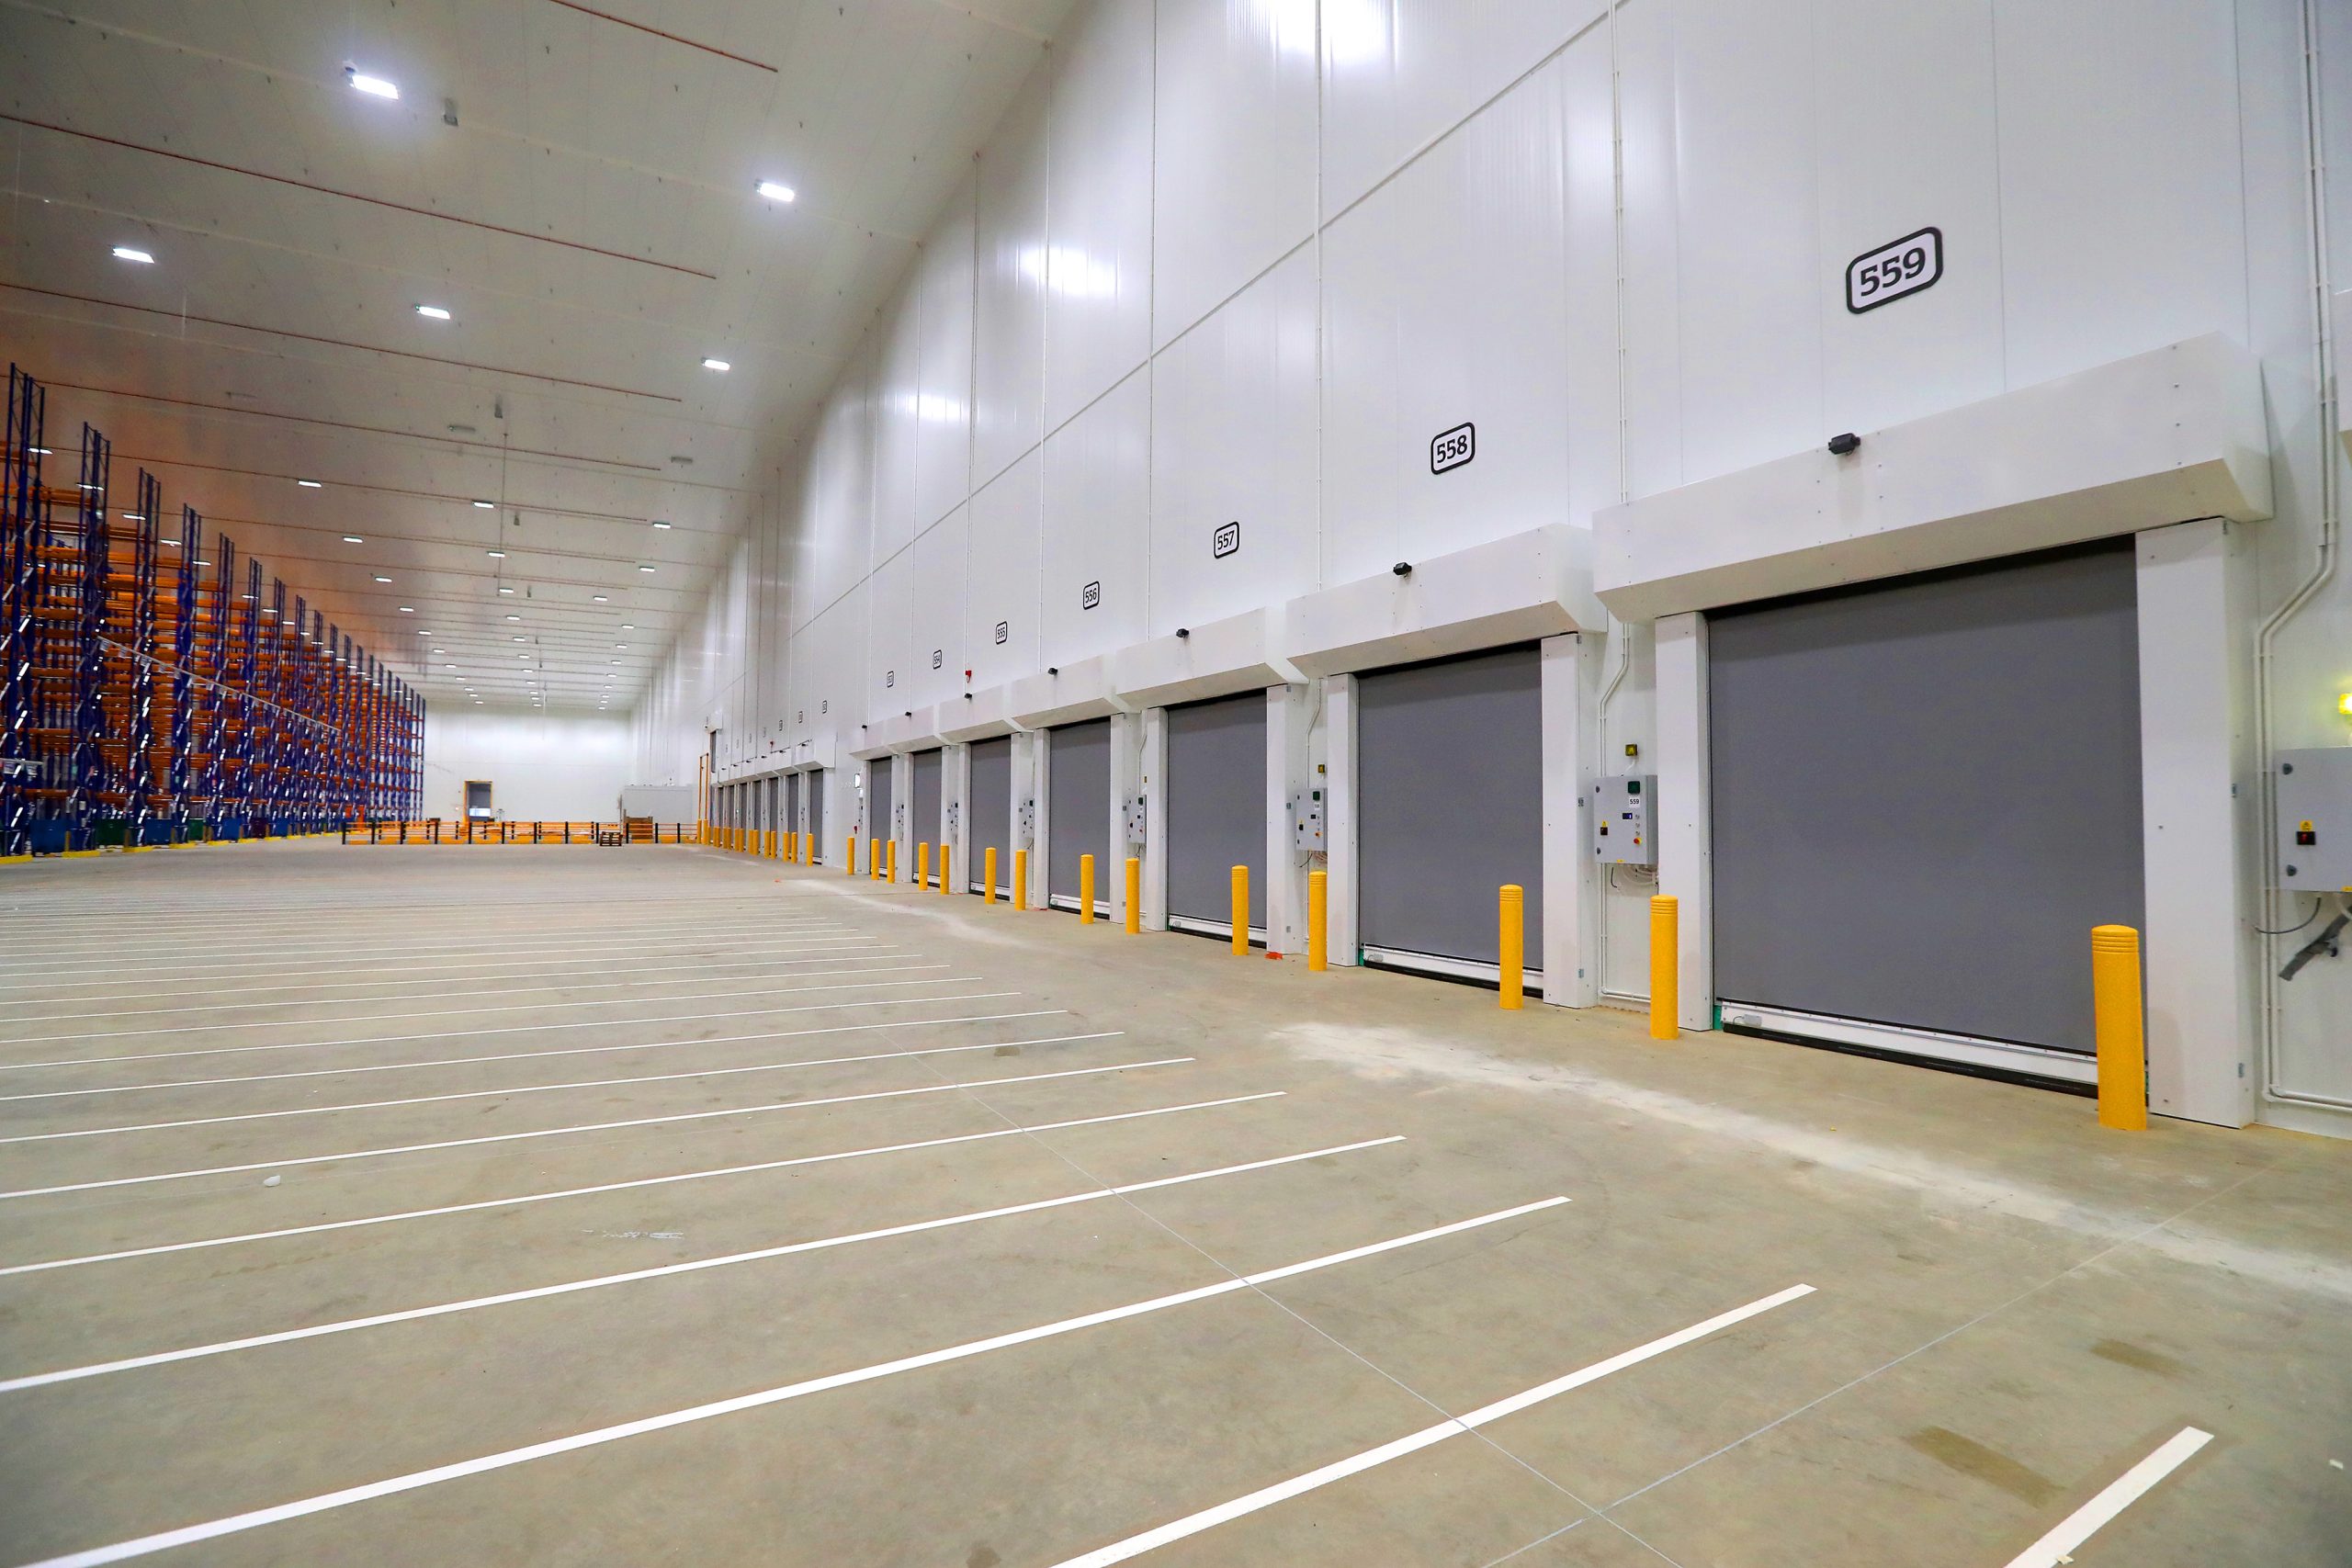 SAINSBURYS PINEHAM FROZEN NATIONAL DISTRIBUTION CENTRE - BASE BUILDPictures by Adam FradgleyPictured at GV / General View of the loading dock inside the freezerThe new Sainsbury's National Frozen Distribution Centre featuring a 2.7KM2 -25c freezer - built by Base Build Services